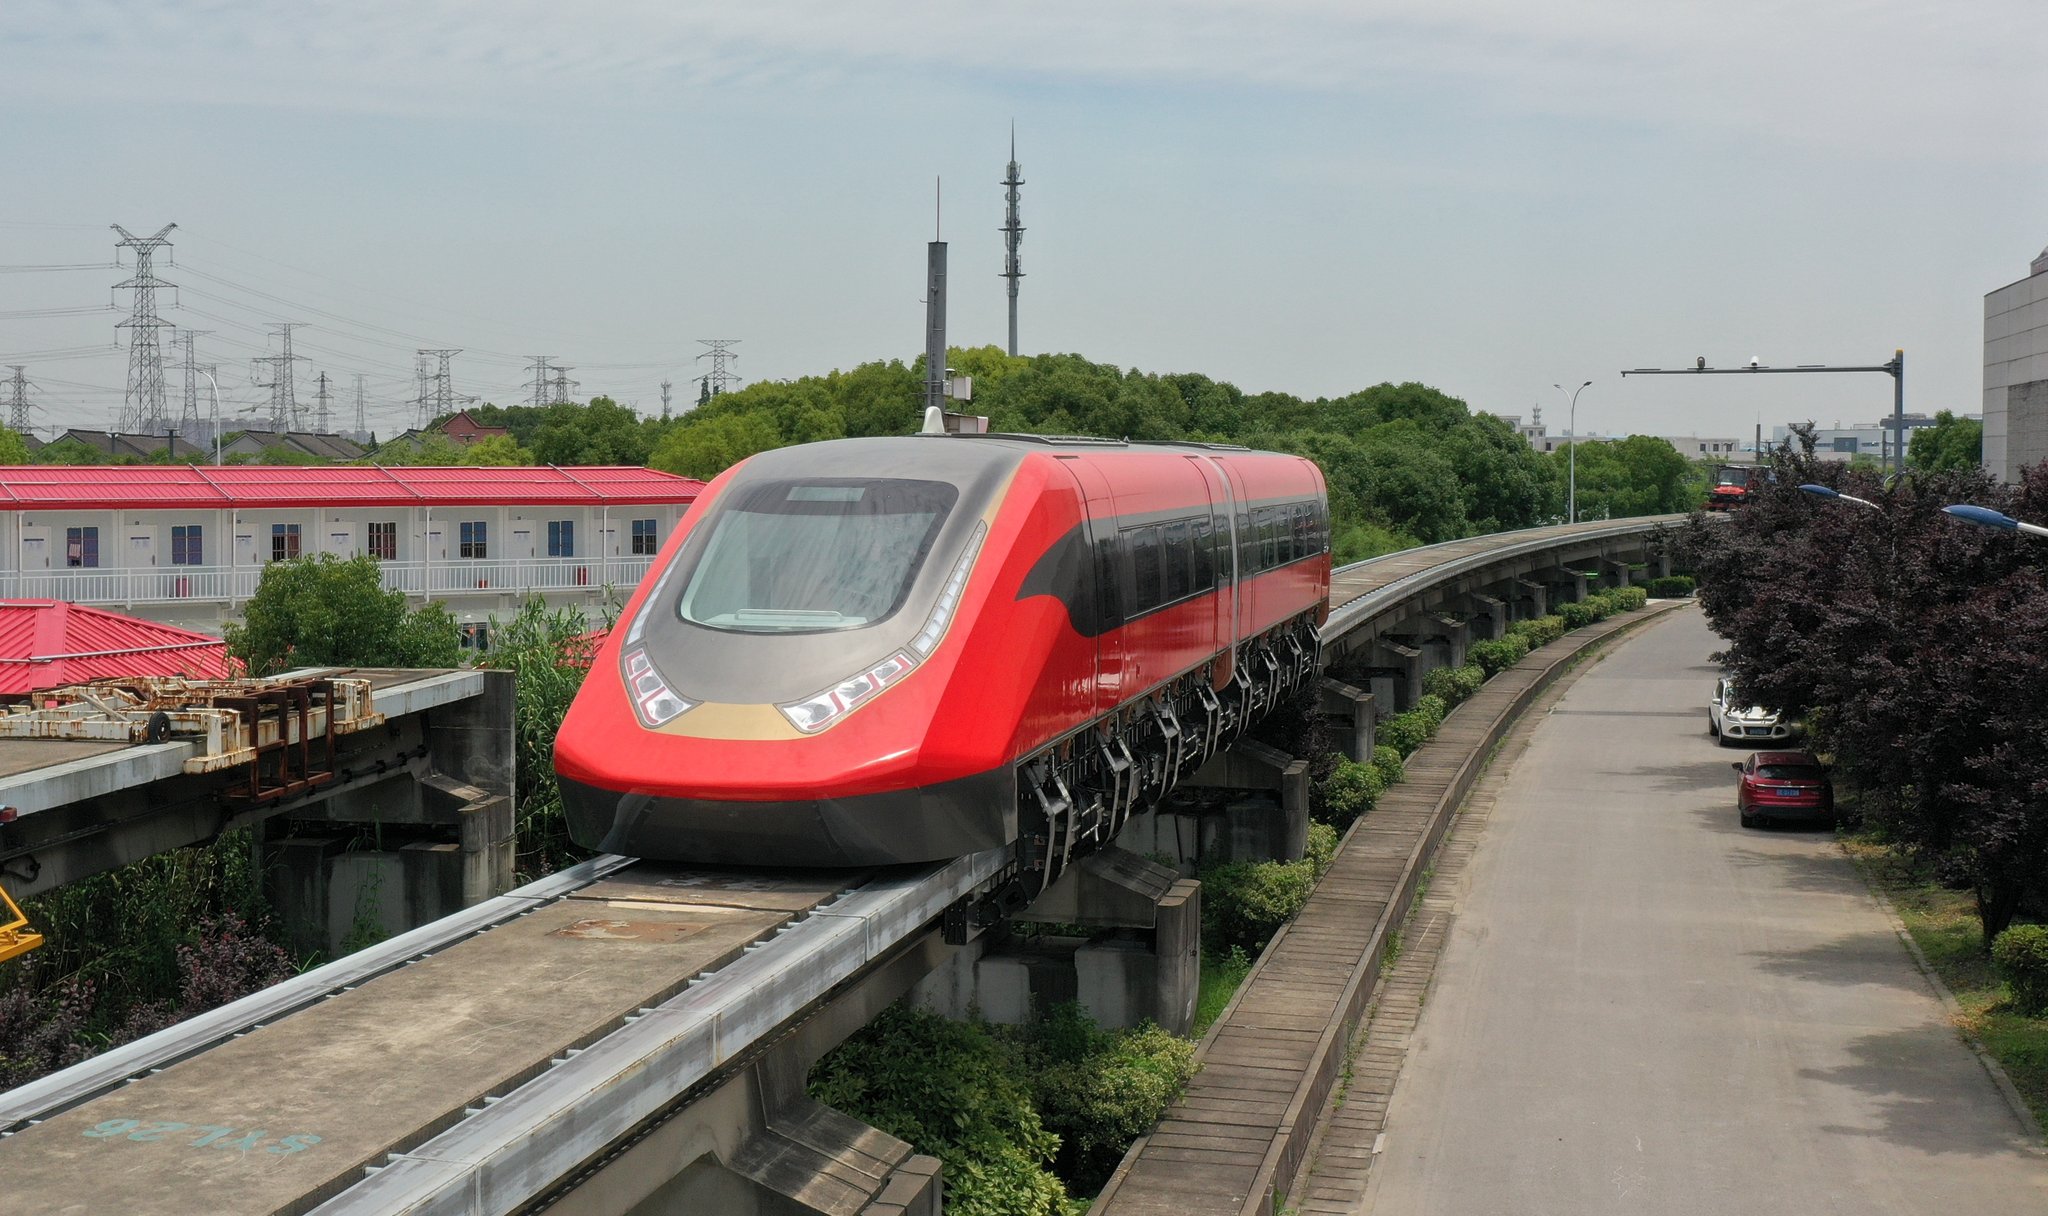 China’s first commercial Maglev train